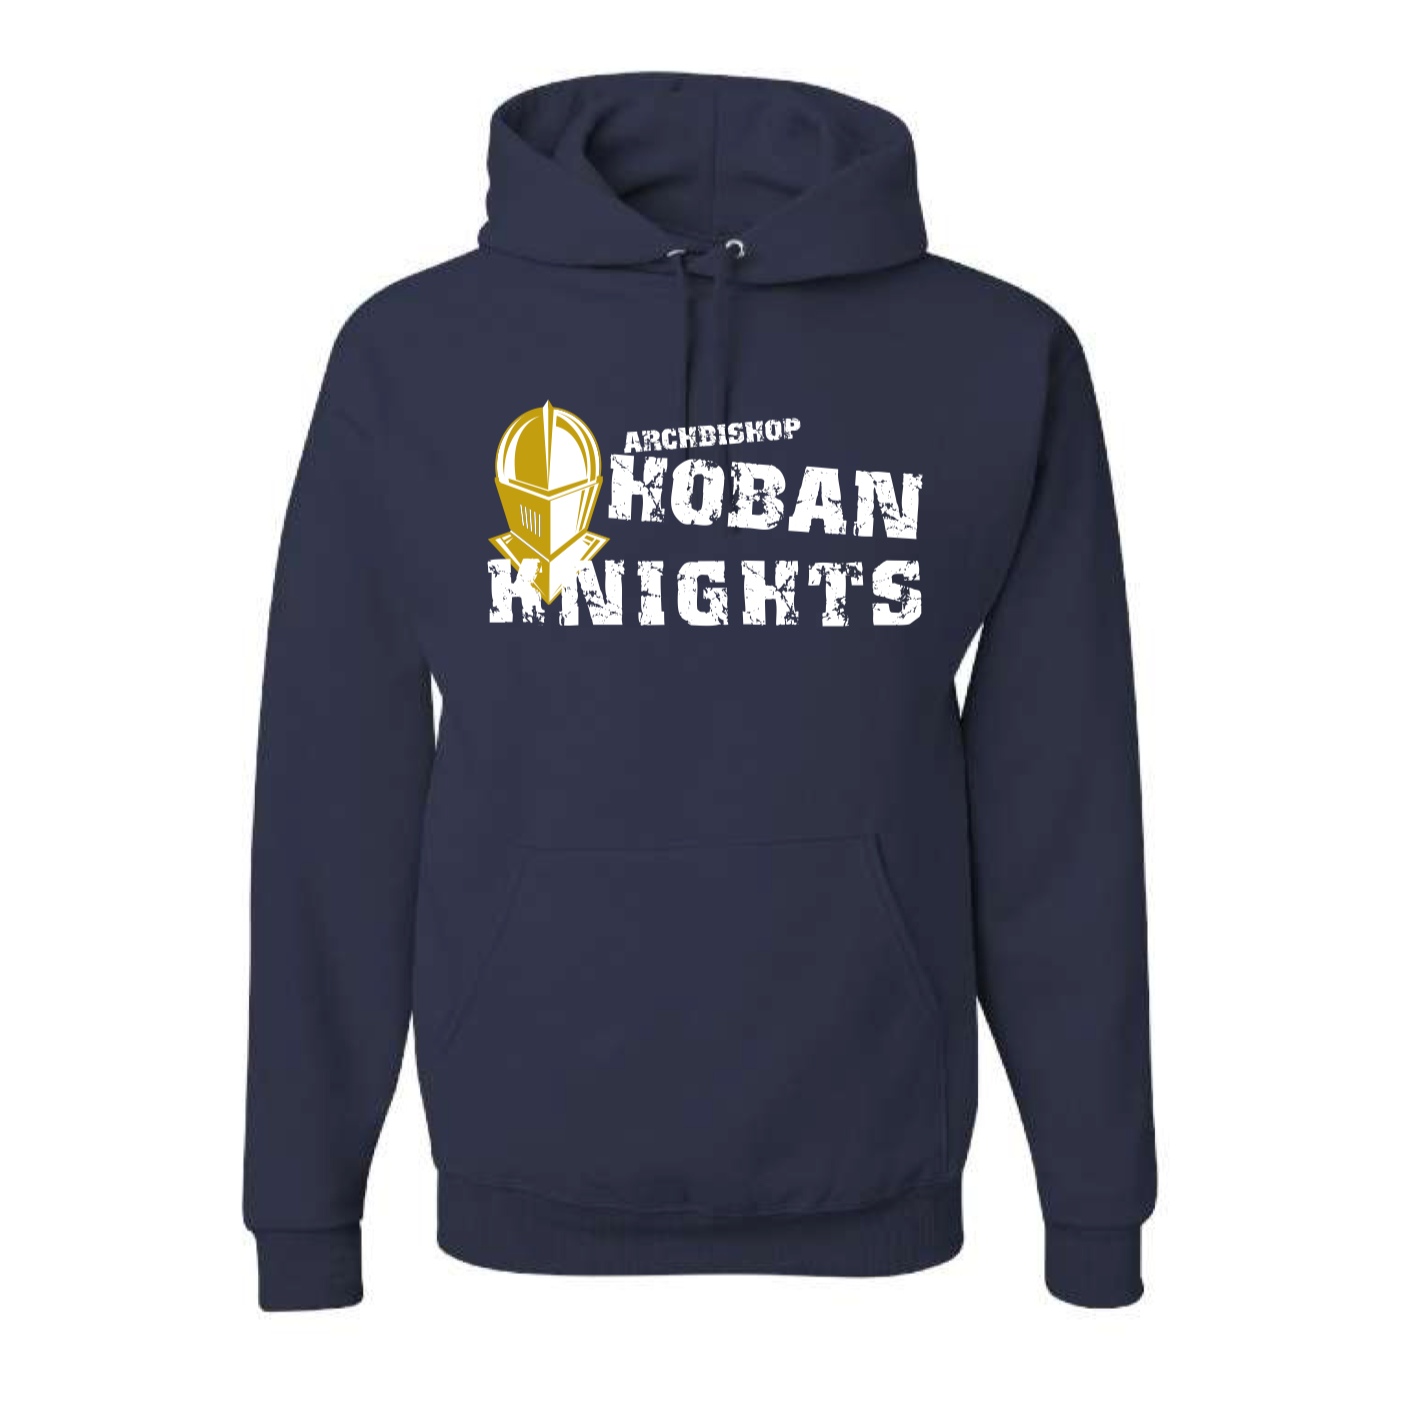 Unisex Hooded Sweatshirt by Jerzees (click for more color options)